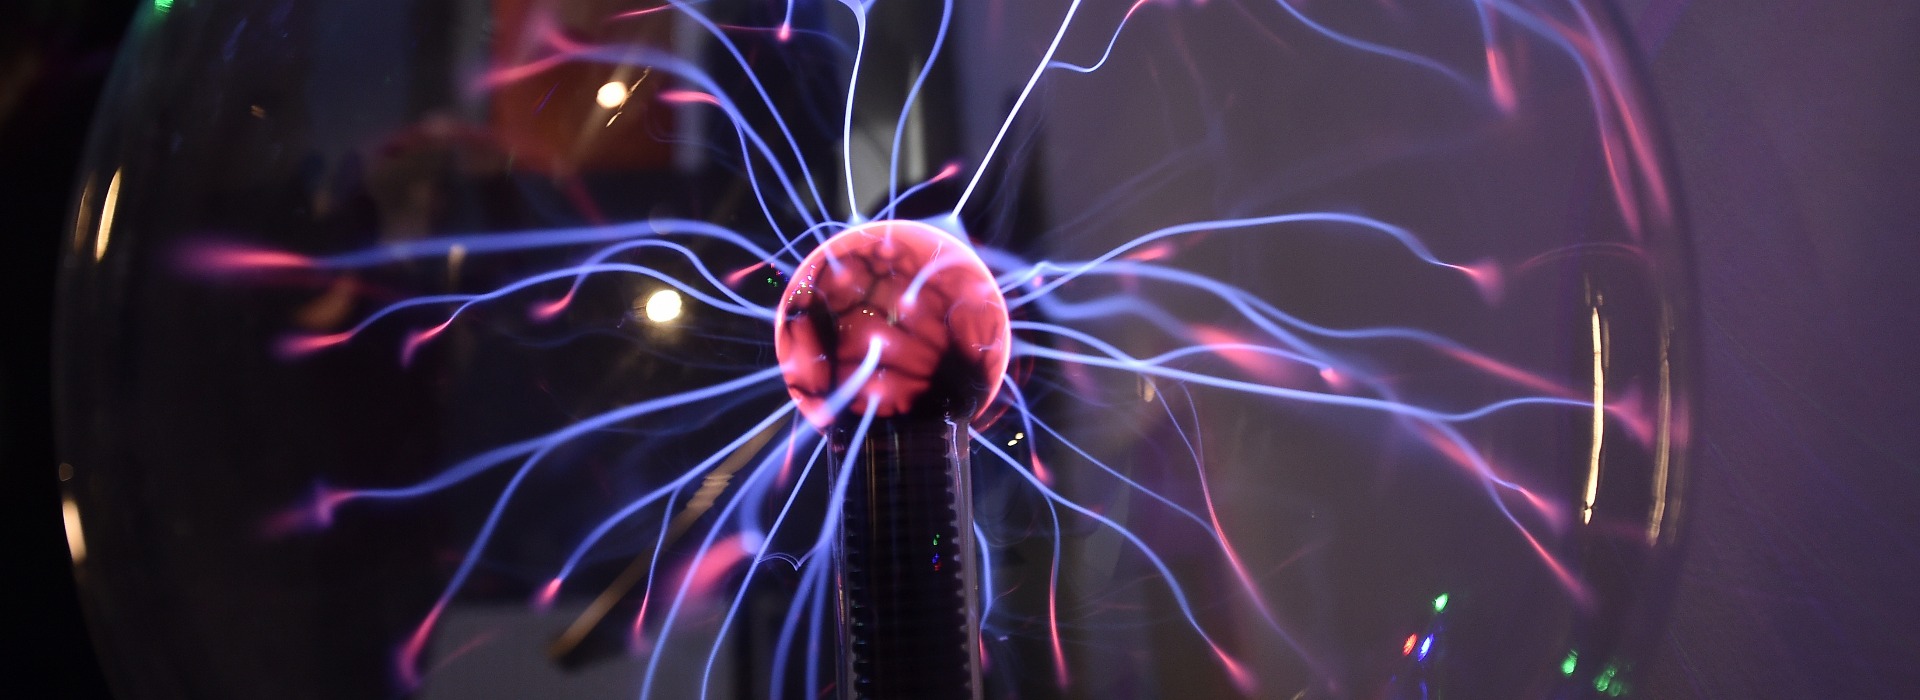 Tesla coil - physics experiment for children